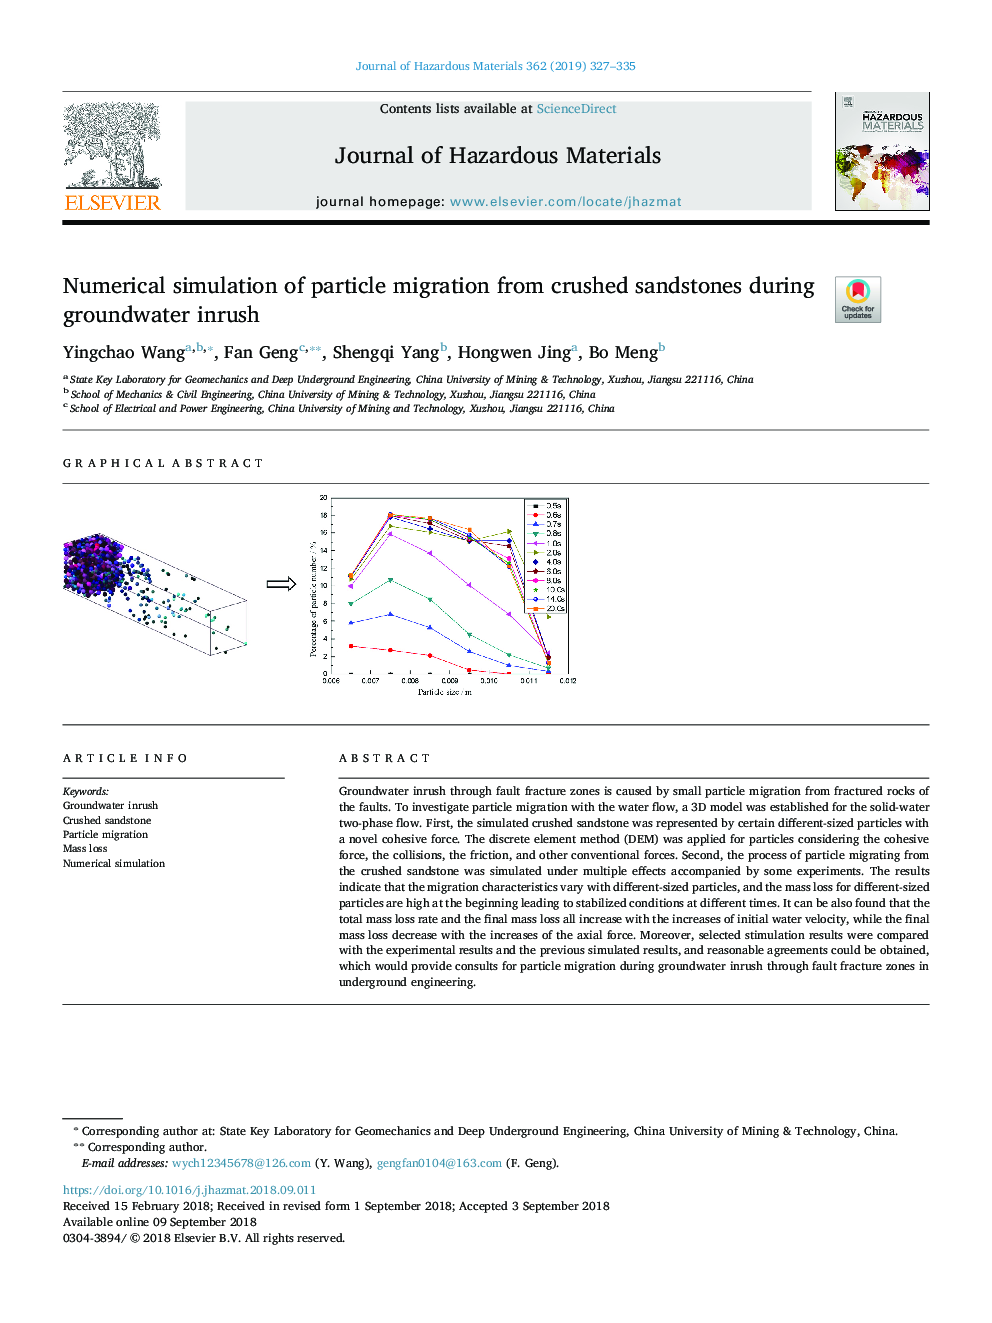 Numerical simulation of particle migration from crushed sandstones during groundwater inrush